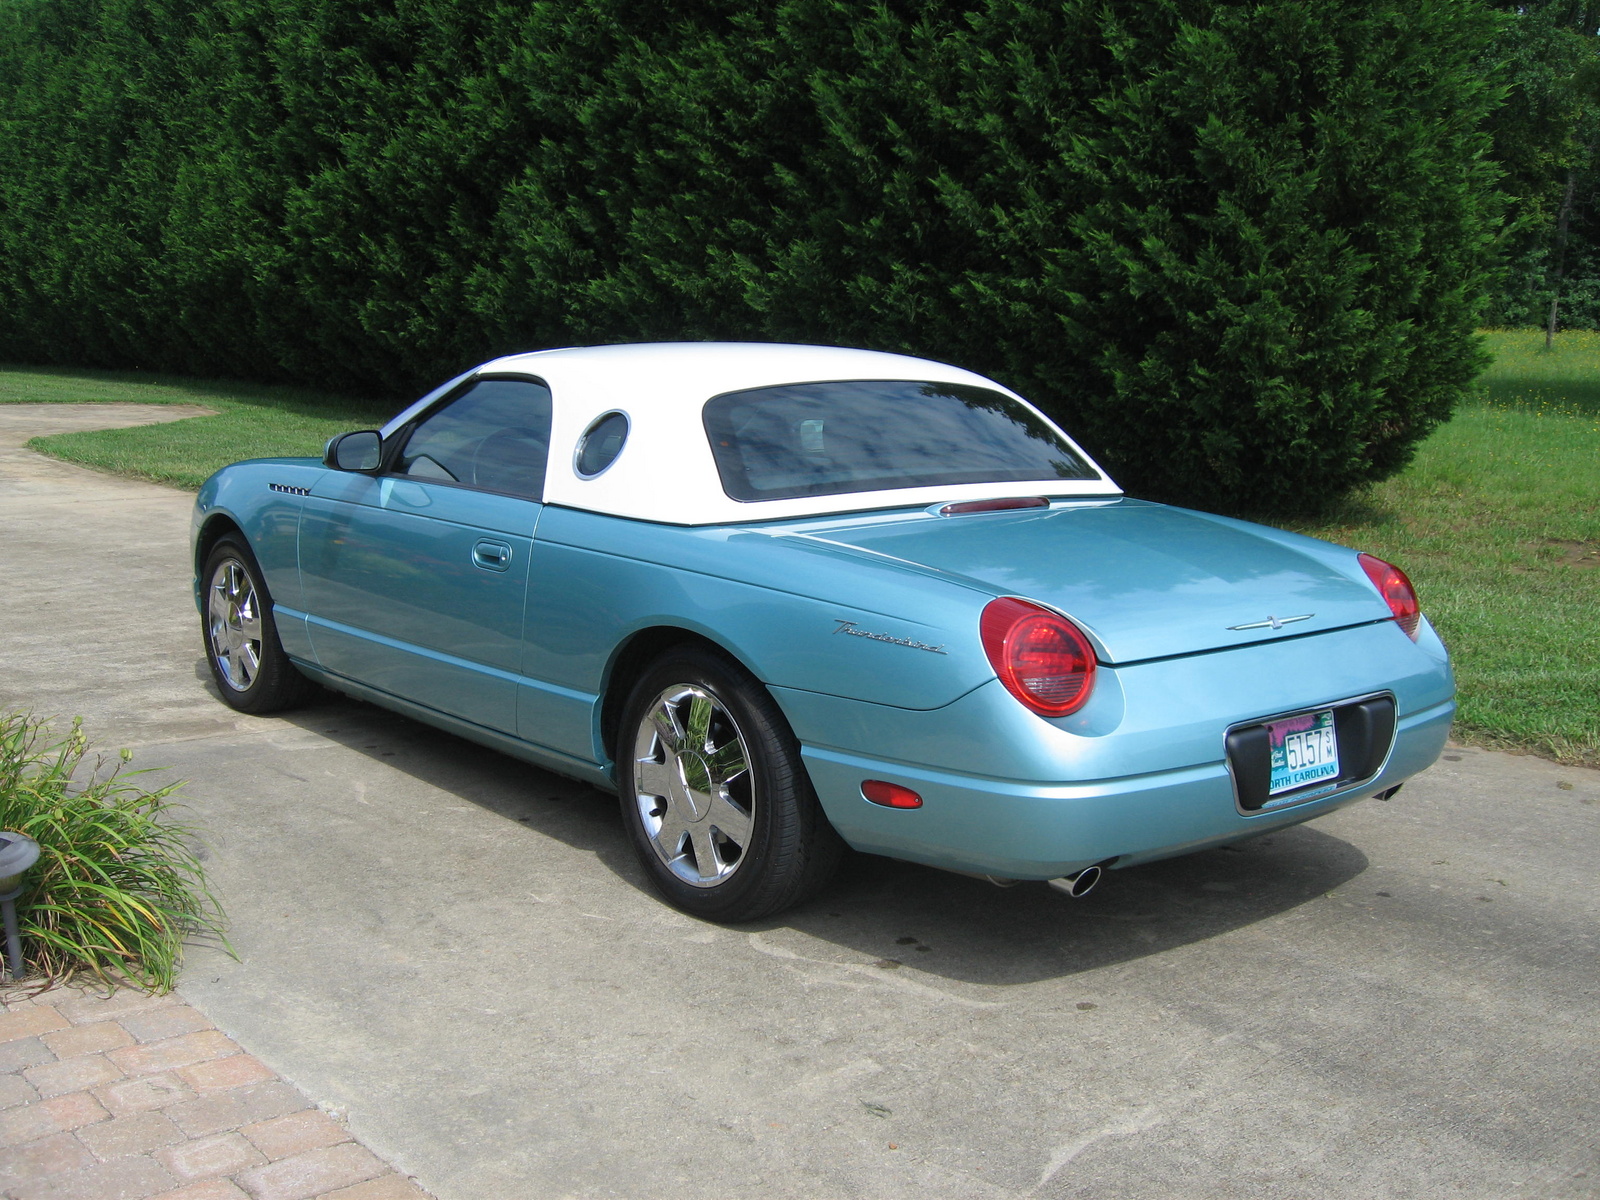 2002 Ford thunderbird convertible review #6